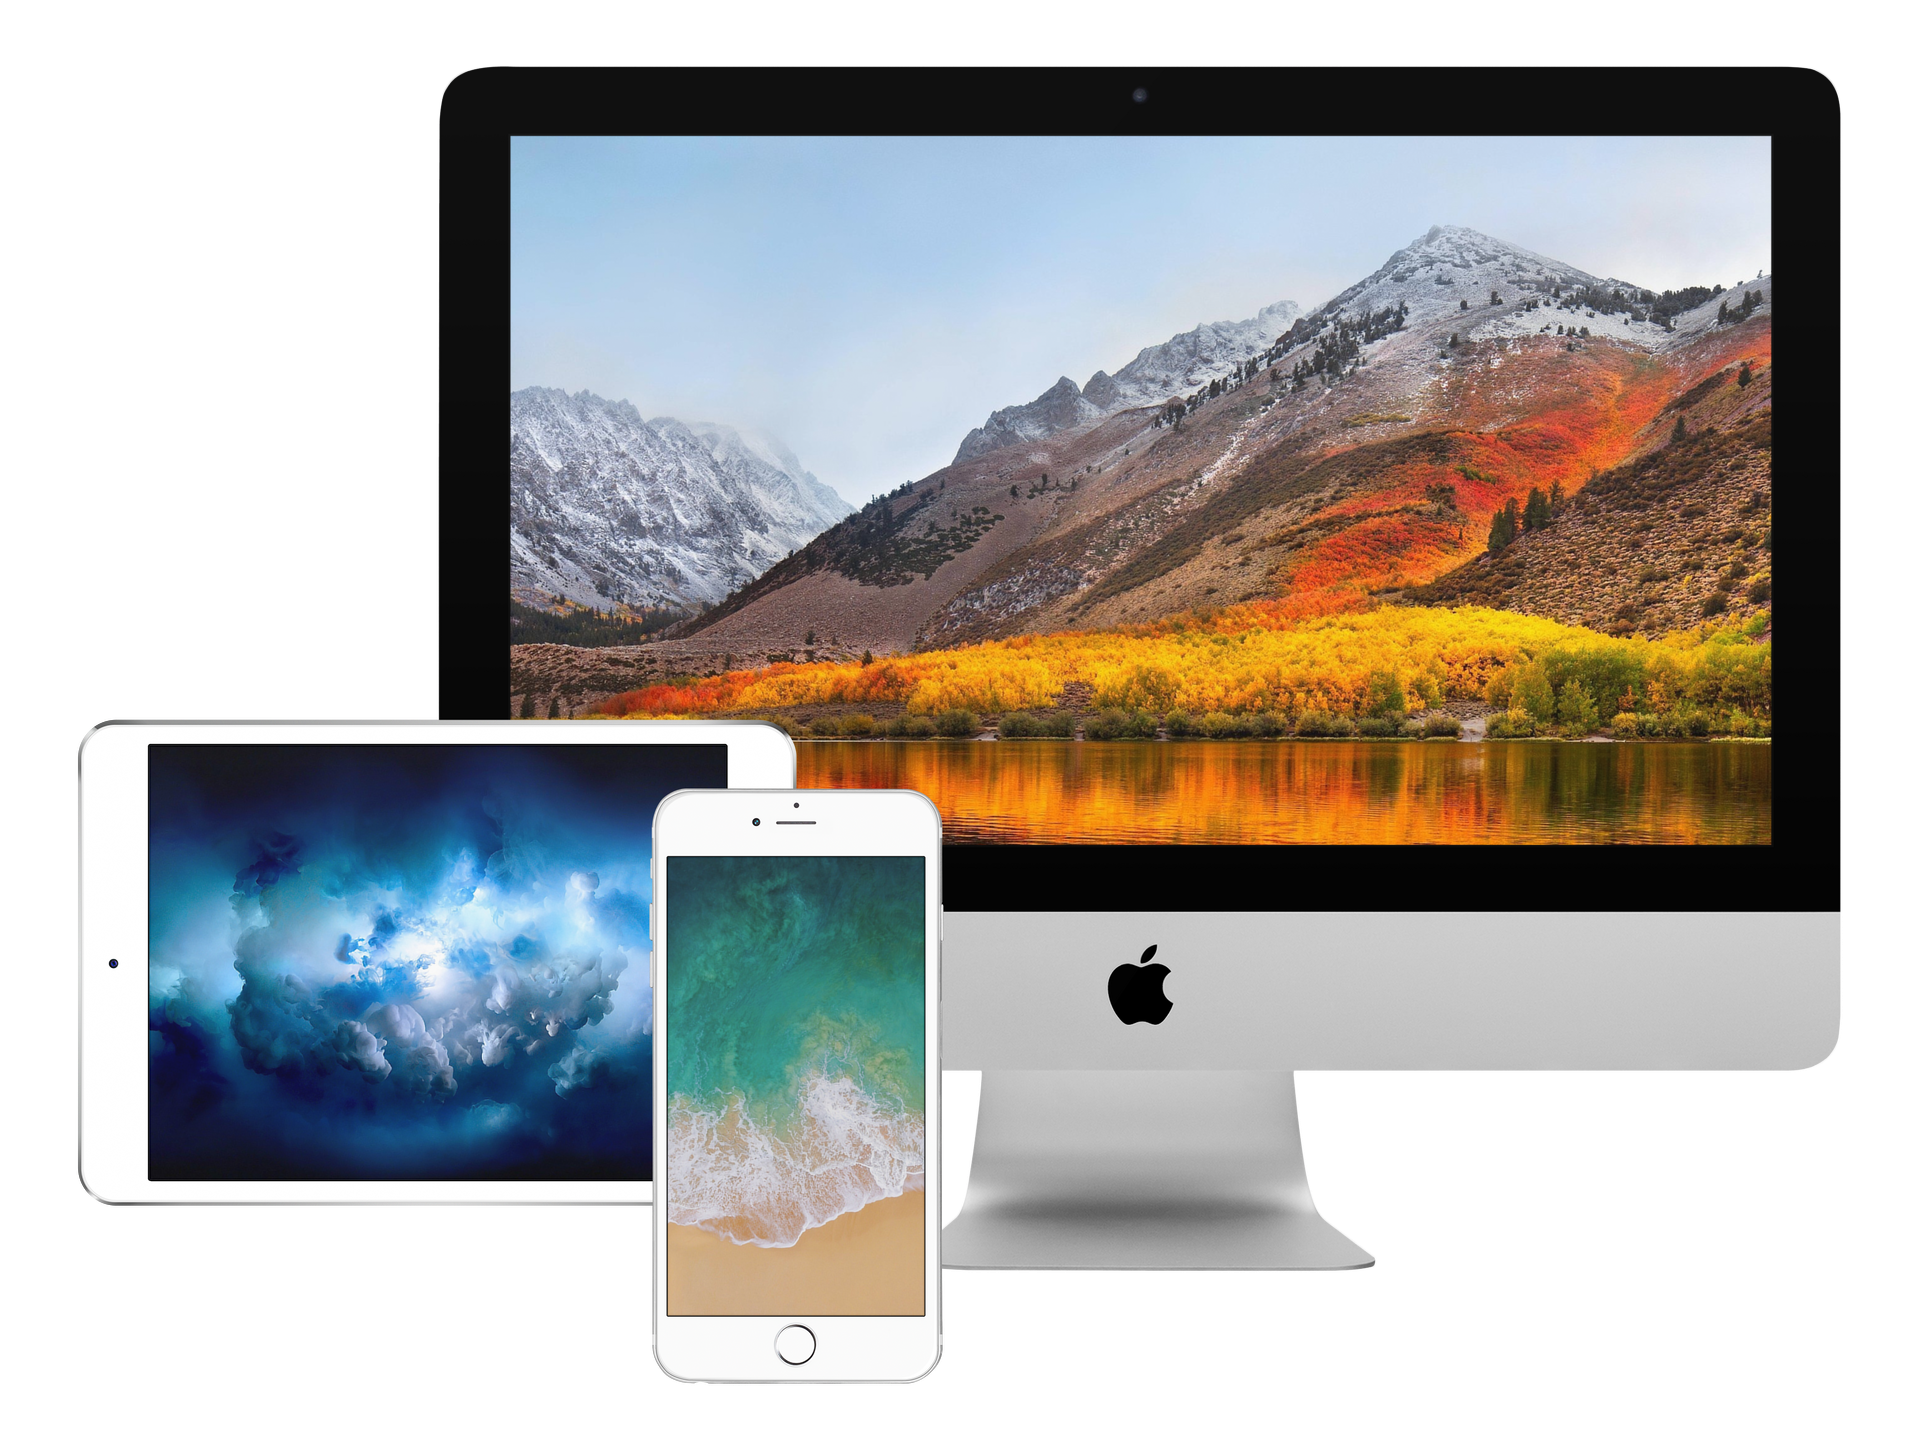 iOS 11, macOS High Sierra, iMac Pro wallpapers from WWDC 2017